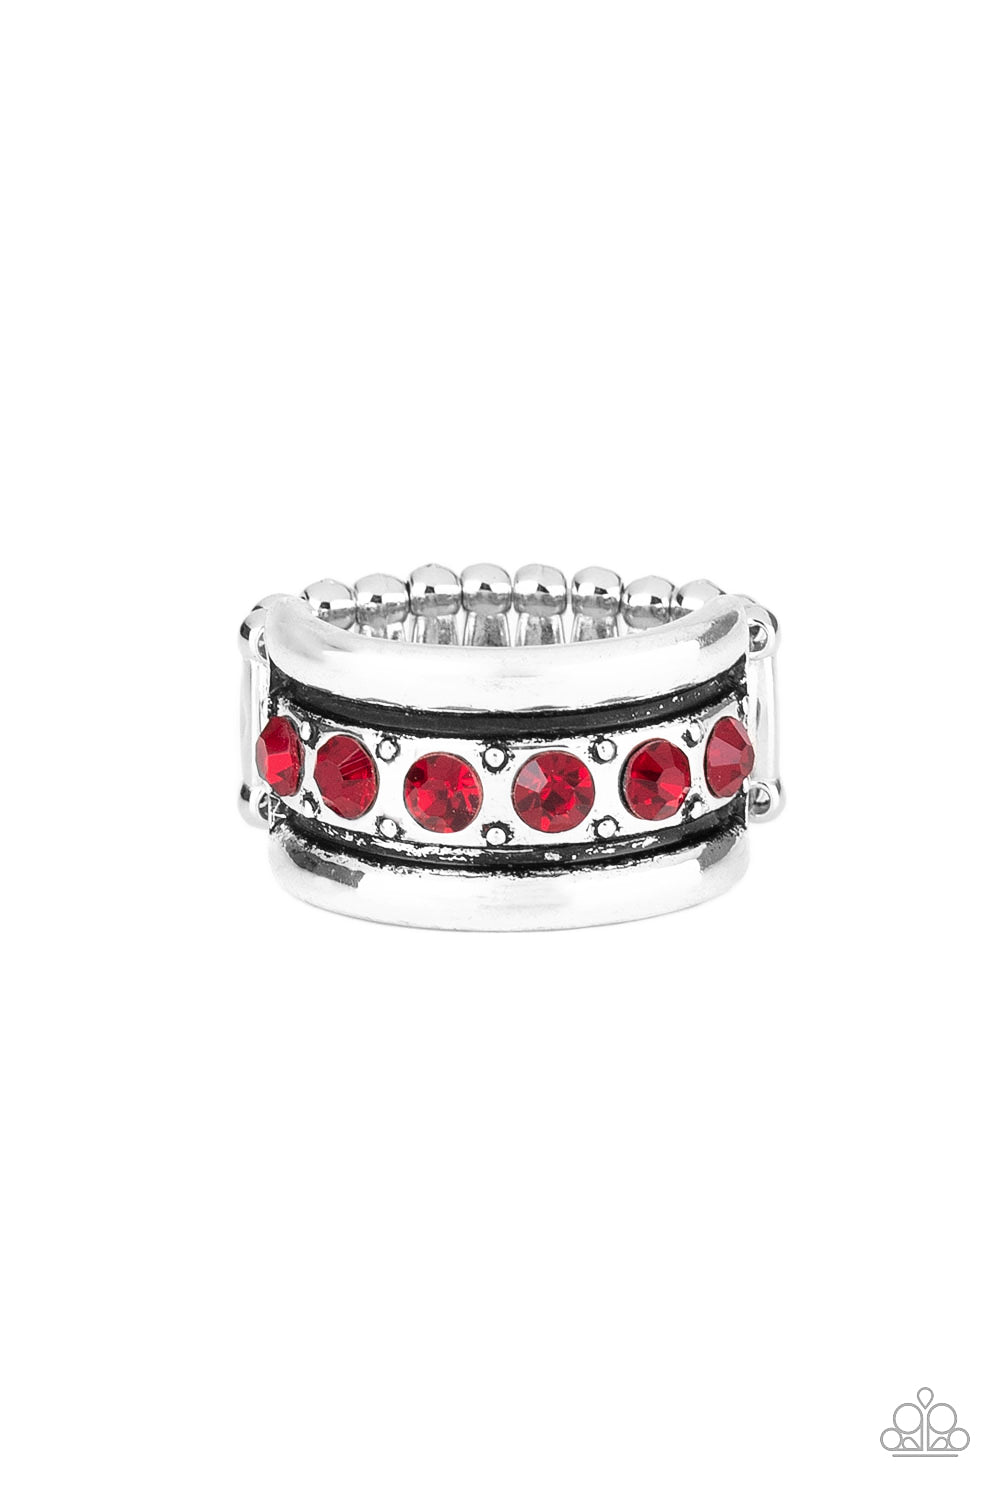 silver, silver jewelry, ring, adjustable ring, affordable jewelry, statement ring, red jewelry, red rhinestone,everyday jewelry, paparazzi accessories